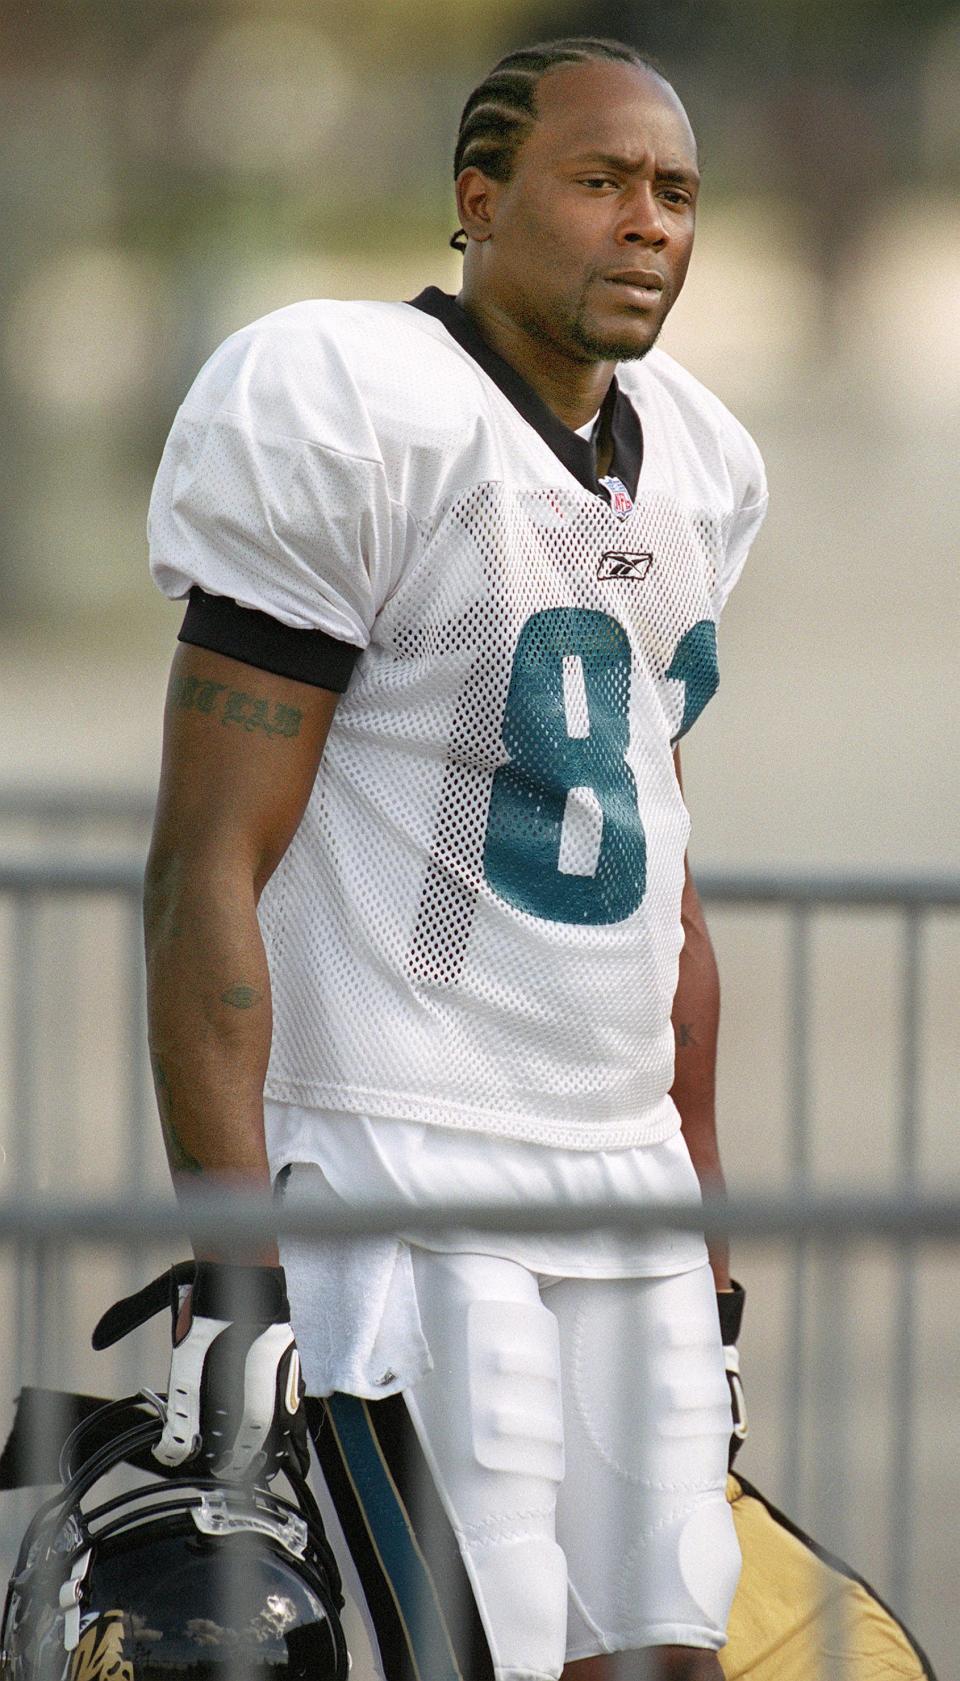 Jacksonville Jaguars receiver R. Jay Soward (81), seen here walking to the practice field in 2001, was supposed to be the missing piece to a Super Bowl run, but self-destructed his way out of the NFL in less than two years.